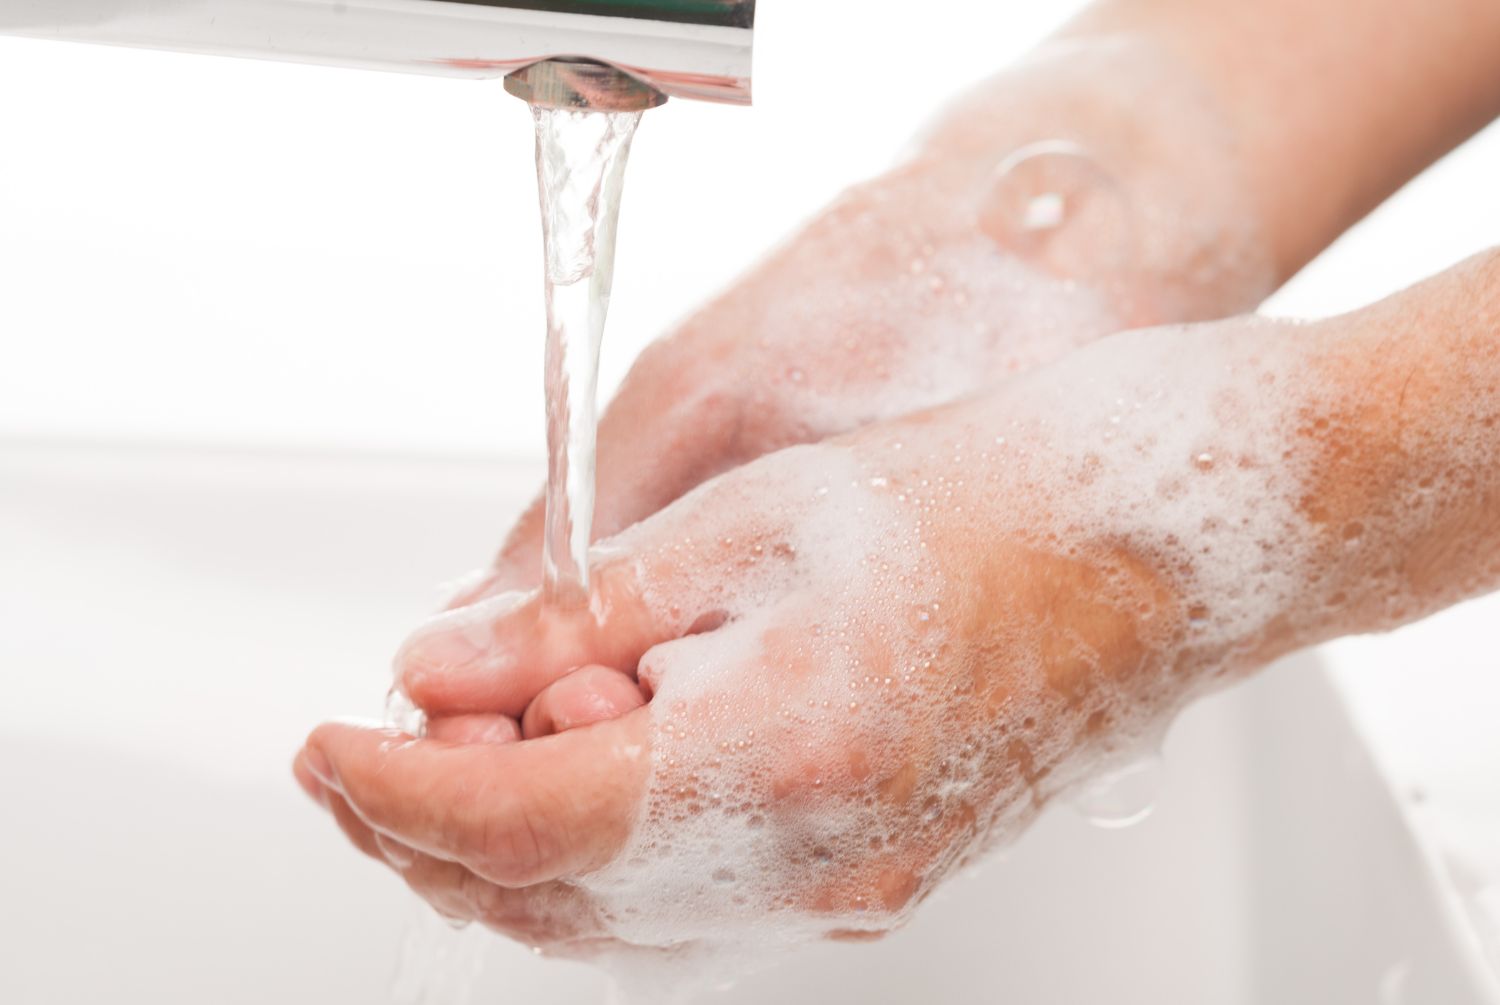 image of person washing hands in water with lots of soap suds